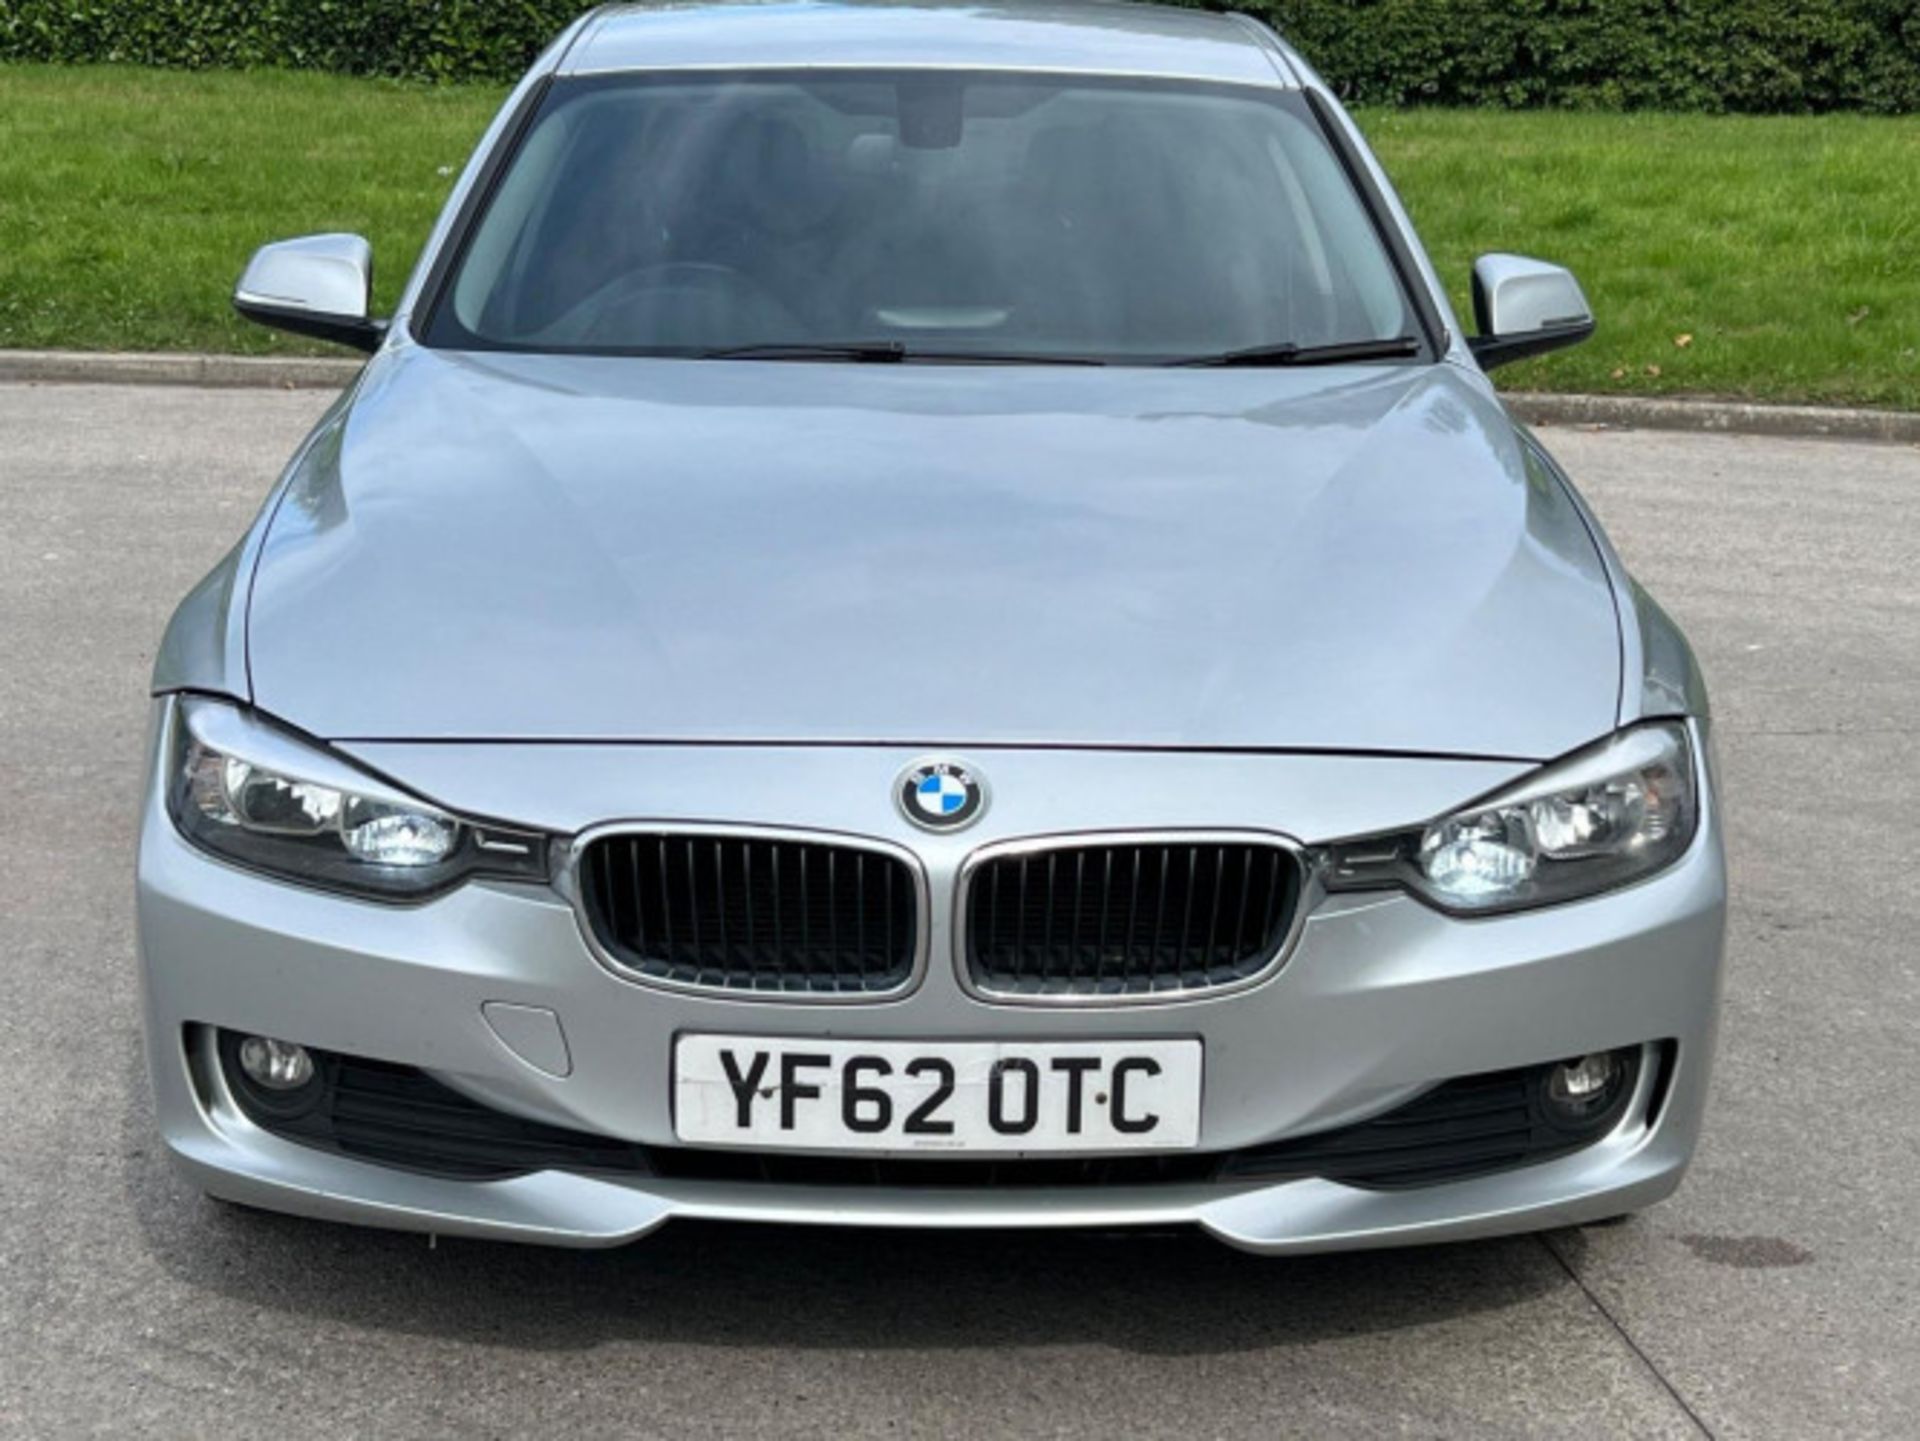 BMW 3 SERIES 2.0 DIESEL ED START STOP - A WELL-MAINTAINED GEM >>--NO VAT ON HAMMER--<< - Image 226 of 229